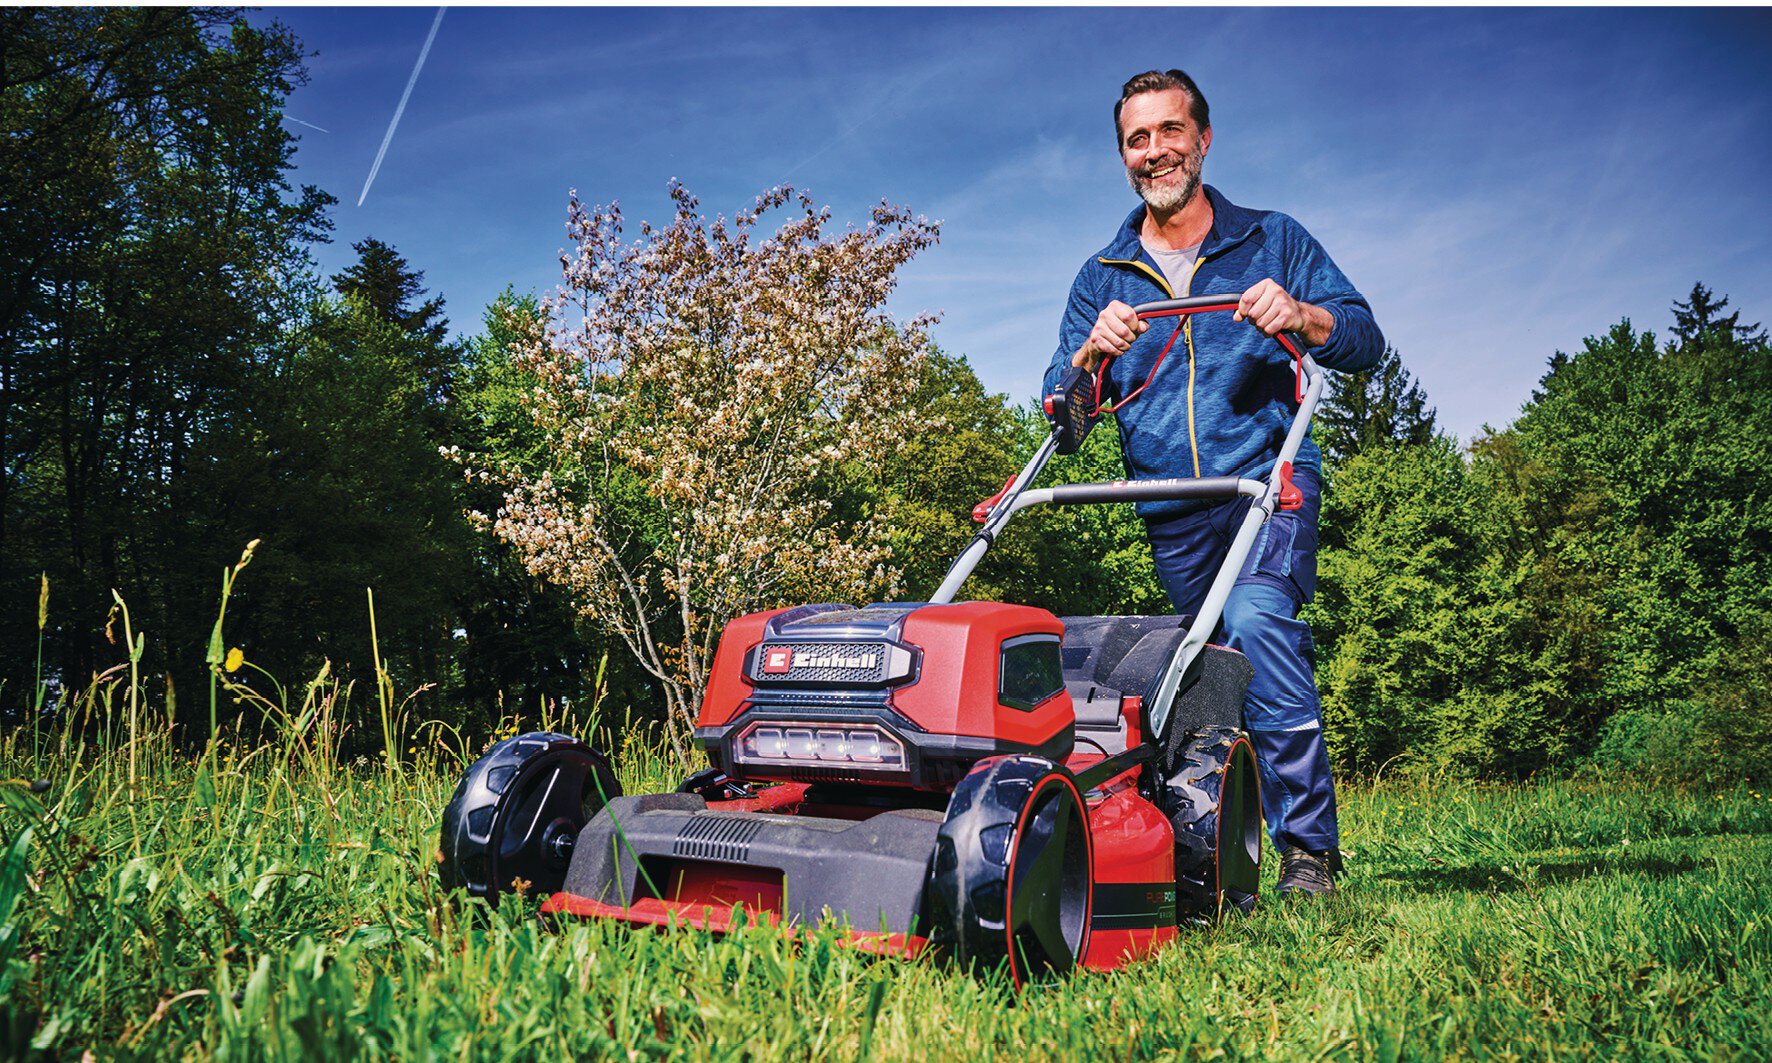 einhell-professional-cordless-lawn-mower-3413310-example_usage-001